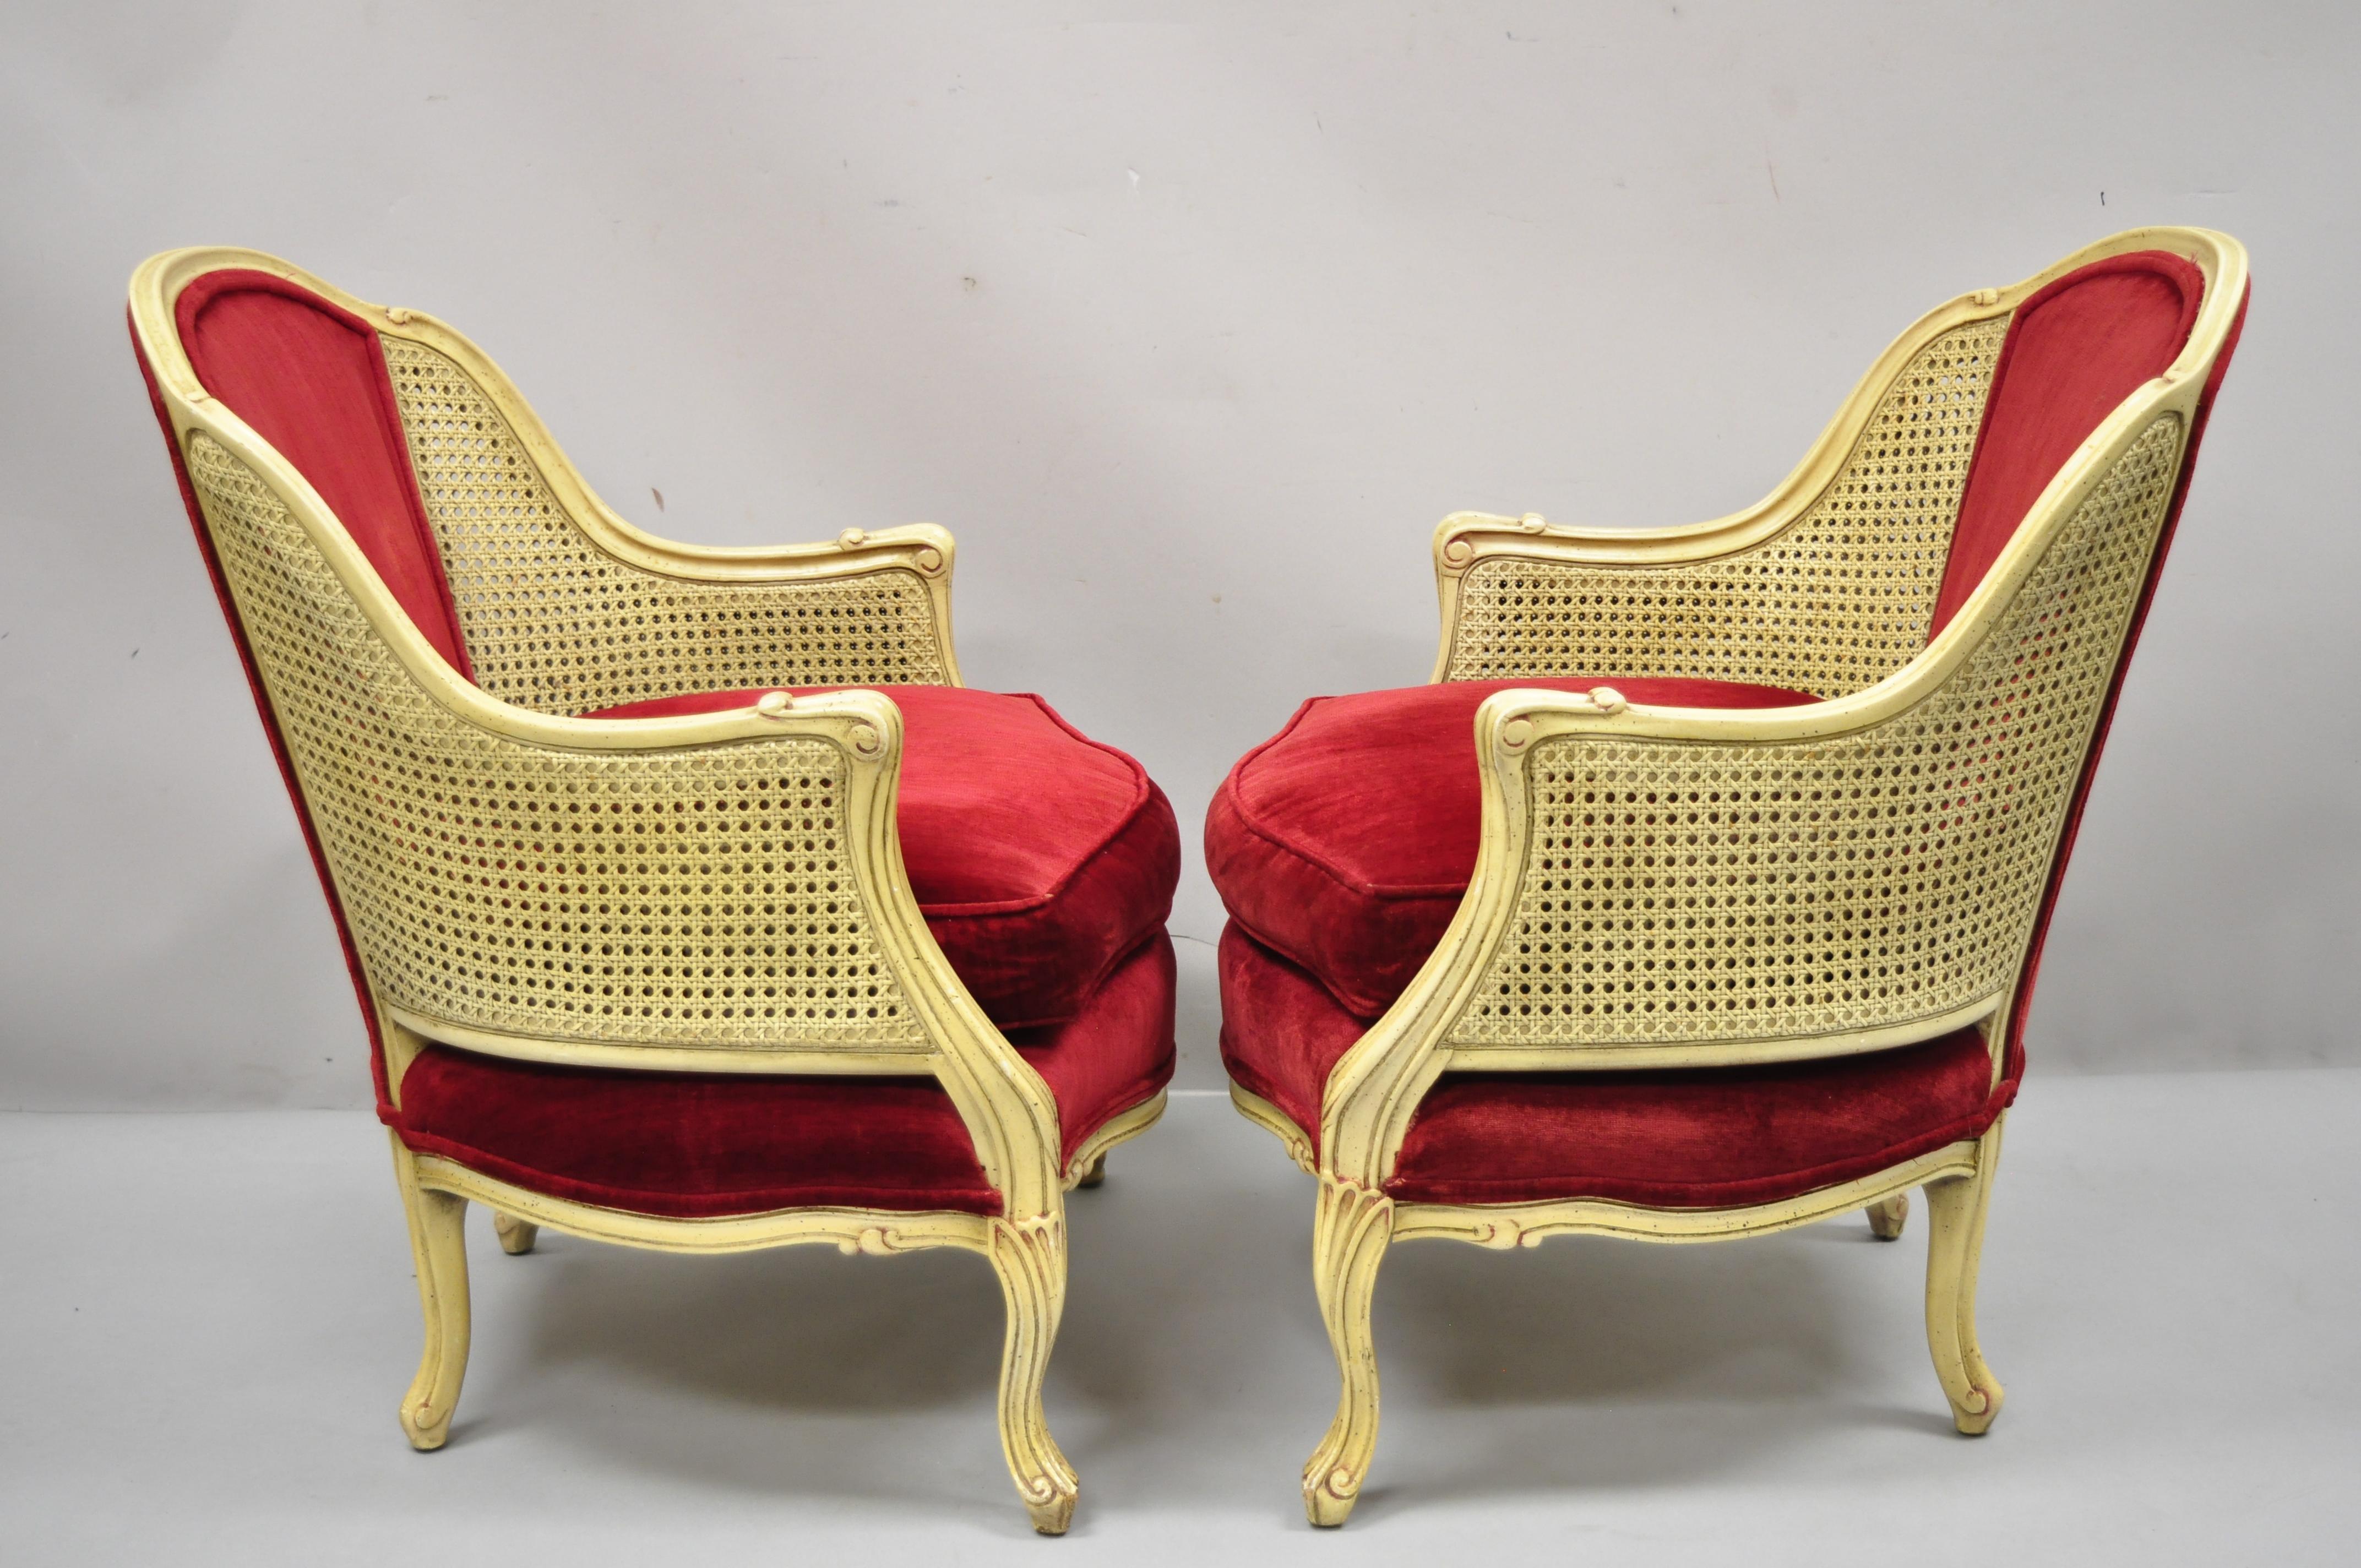 Vintage French Provincial Hollywood regency cream and red cane bergère club arm chairs, a pair. Item features double cane sides, cream painted finish, red upholstery, solid wood frames, cabriole legs, very nice vintage pair, great style and form,